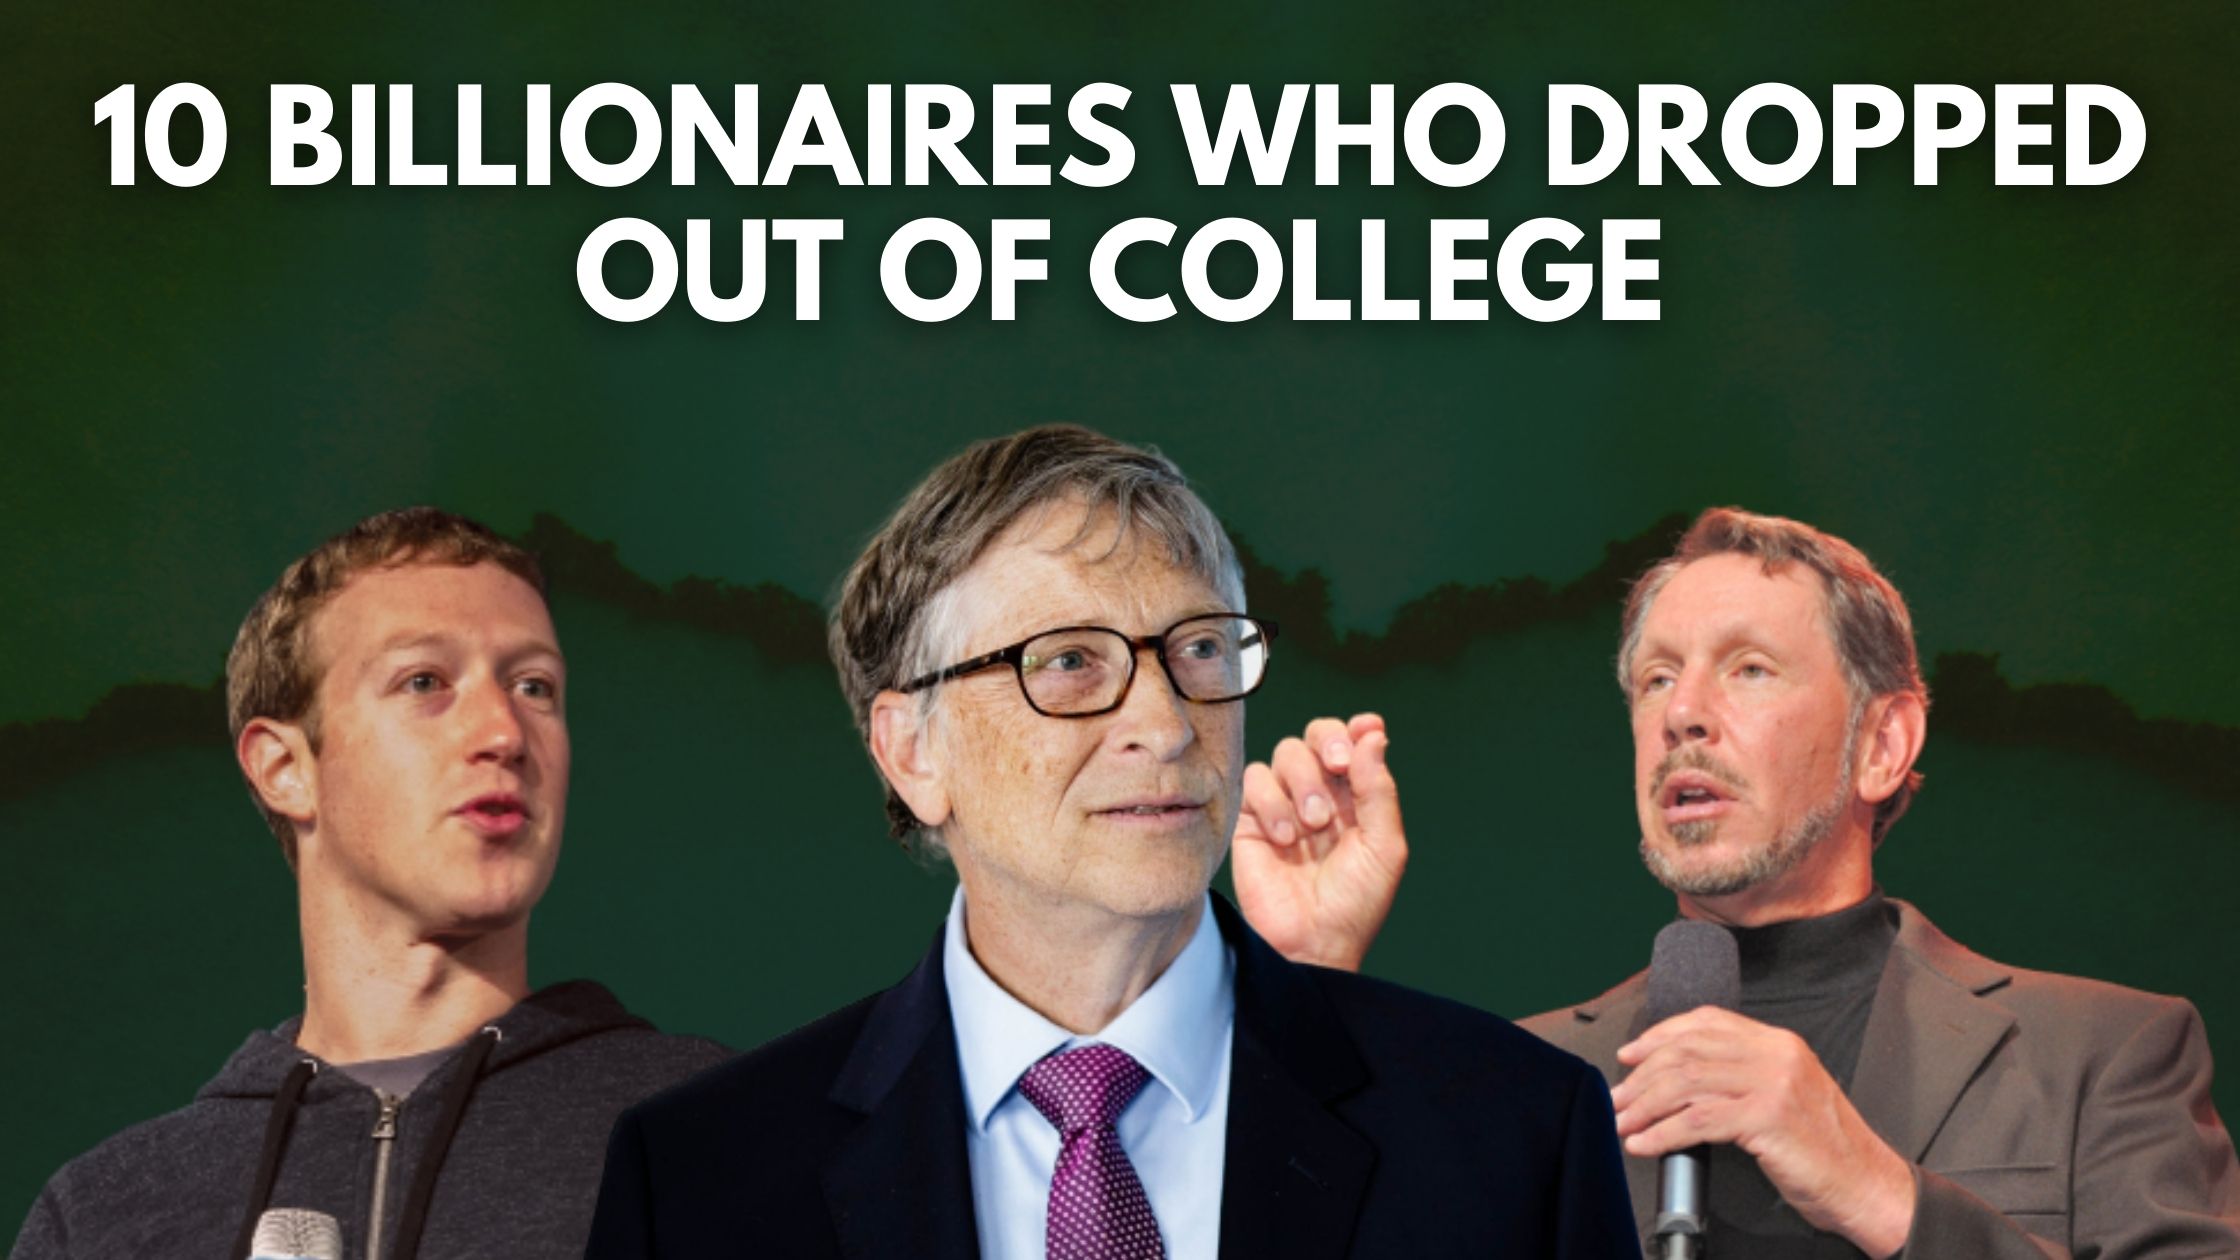 10 Billionaires Who Dropped out of College To Build A Fortune